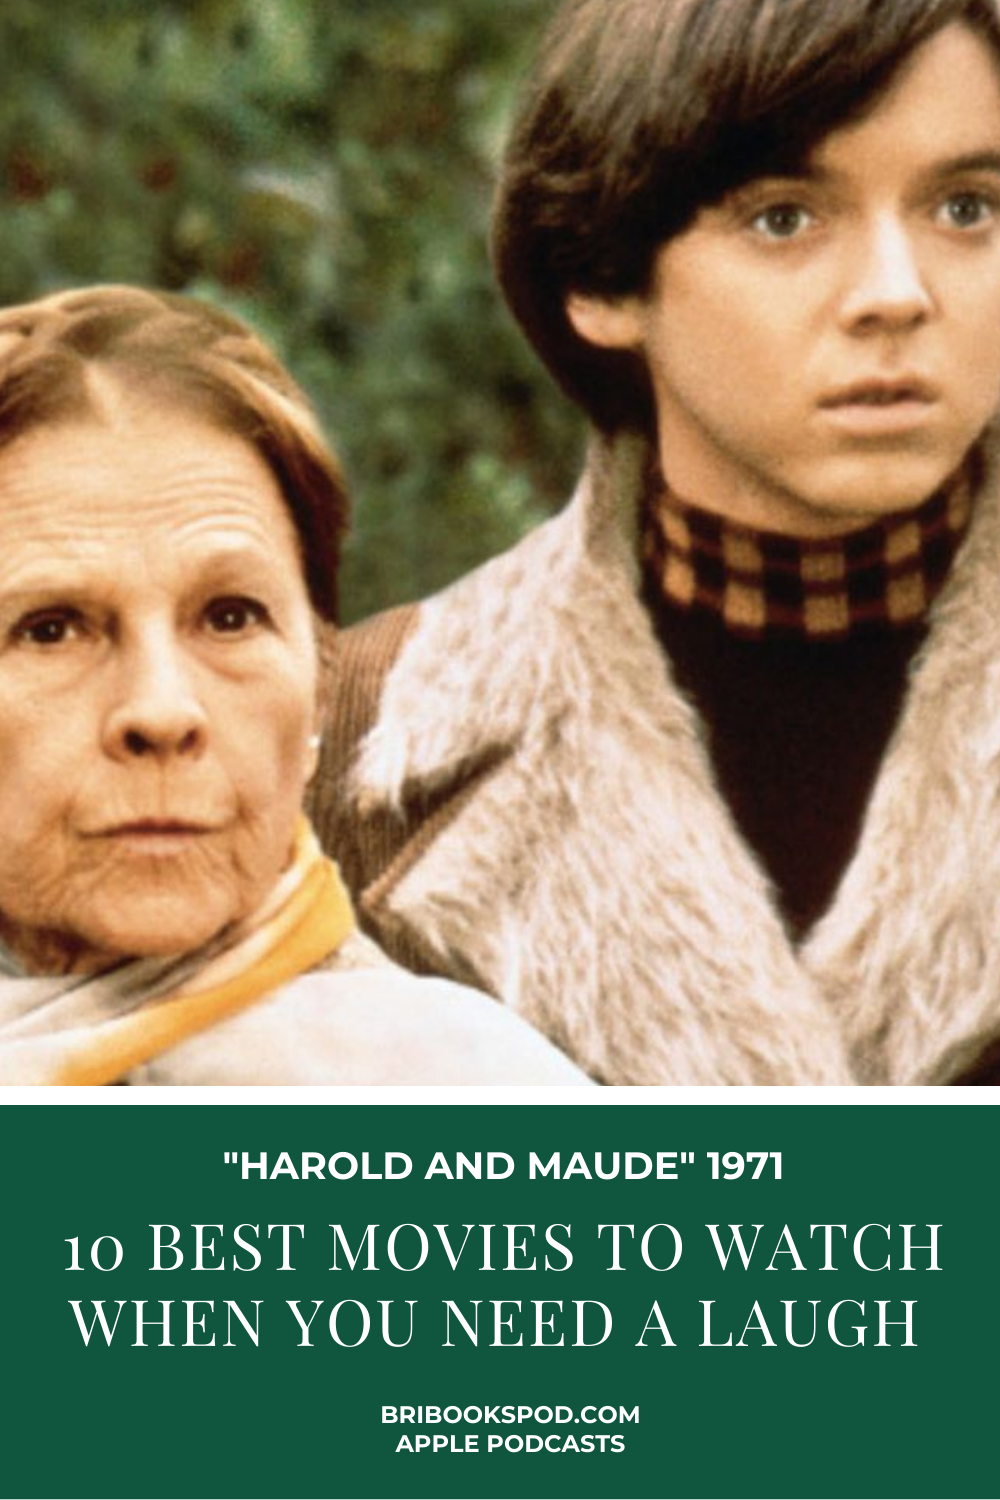 10 Movies to Watch When You Need a Laugh: Harold and Maude